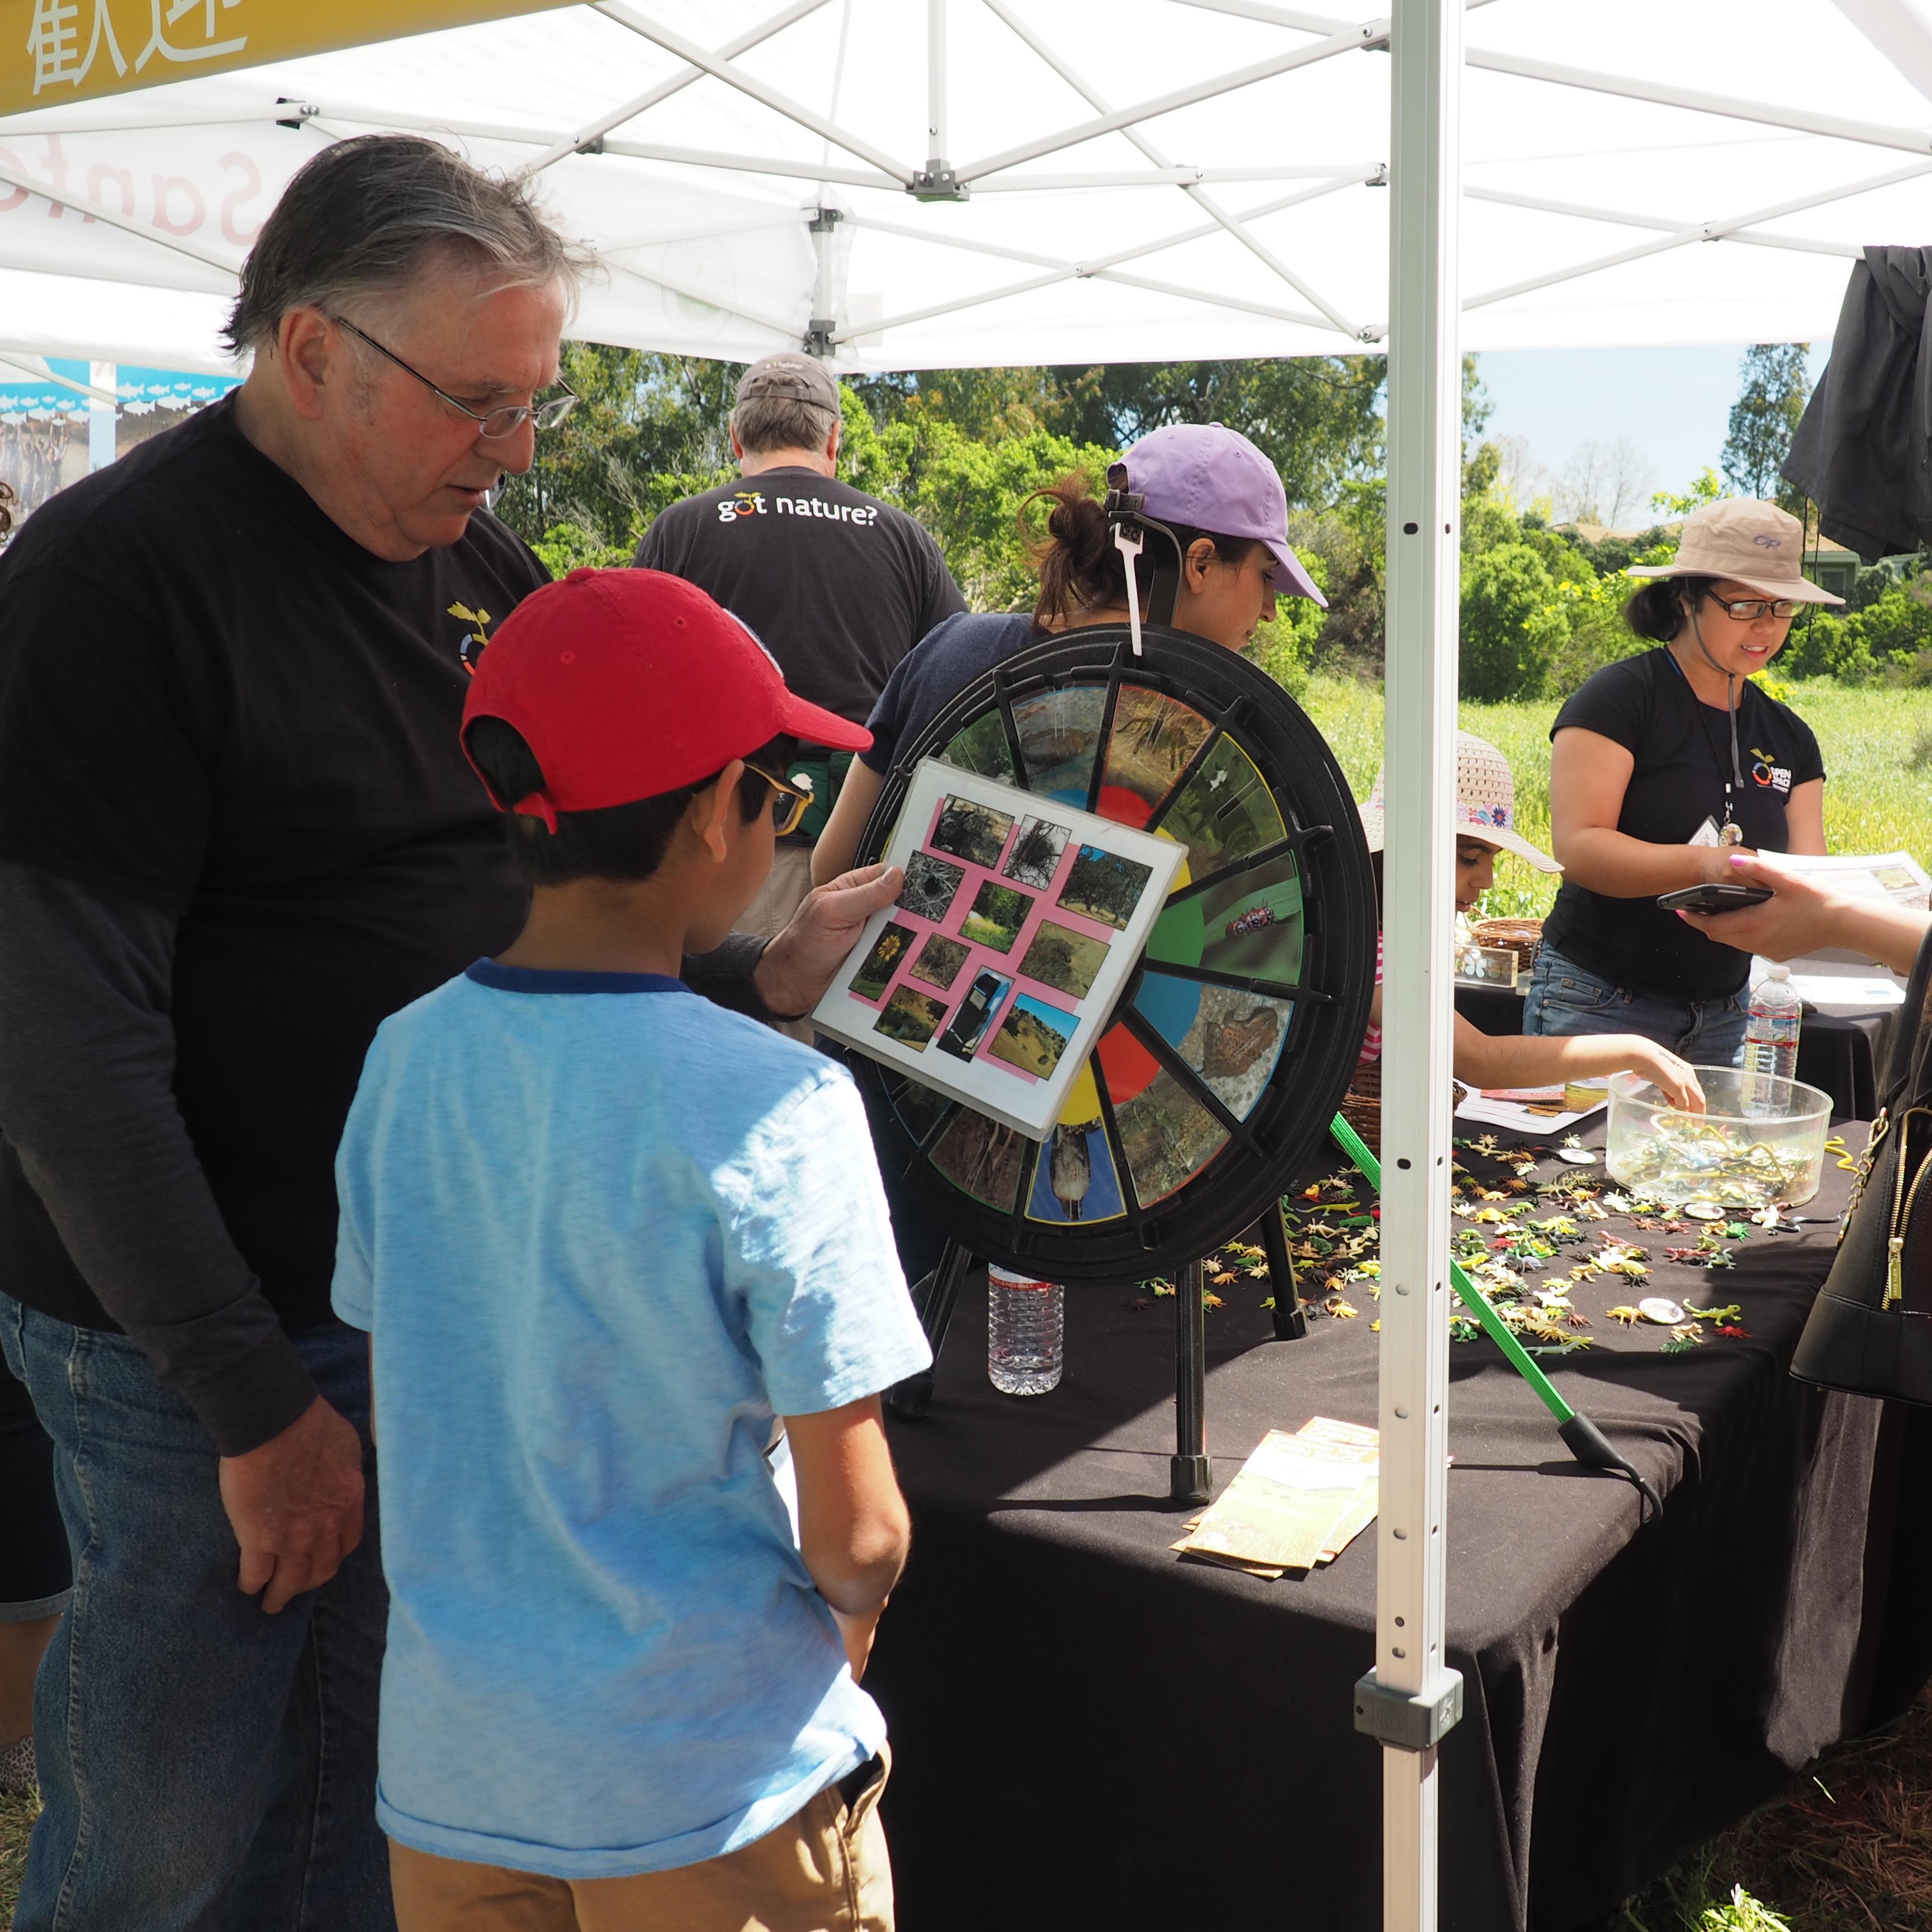 Male volunteer showing nature game to child at festival booth